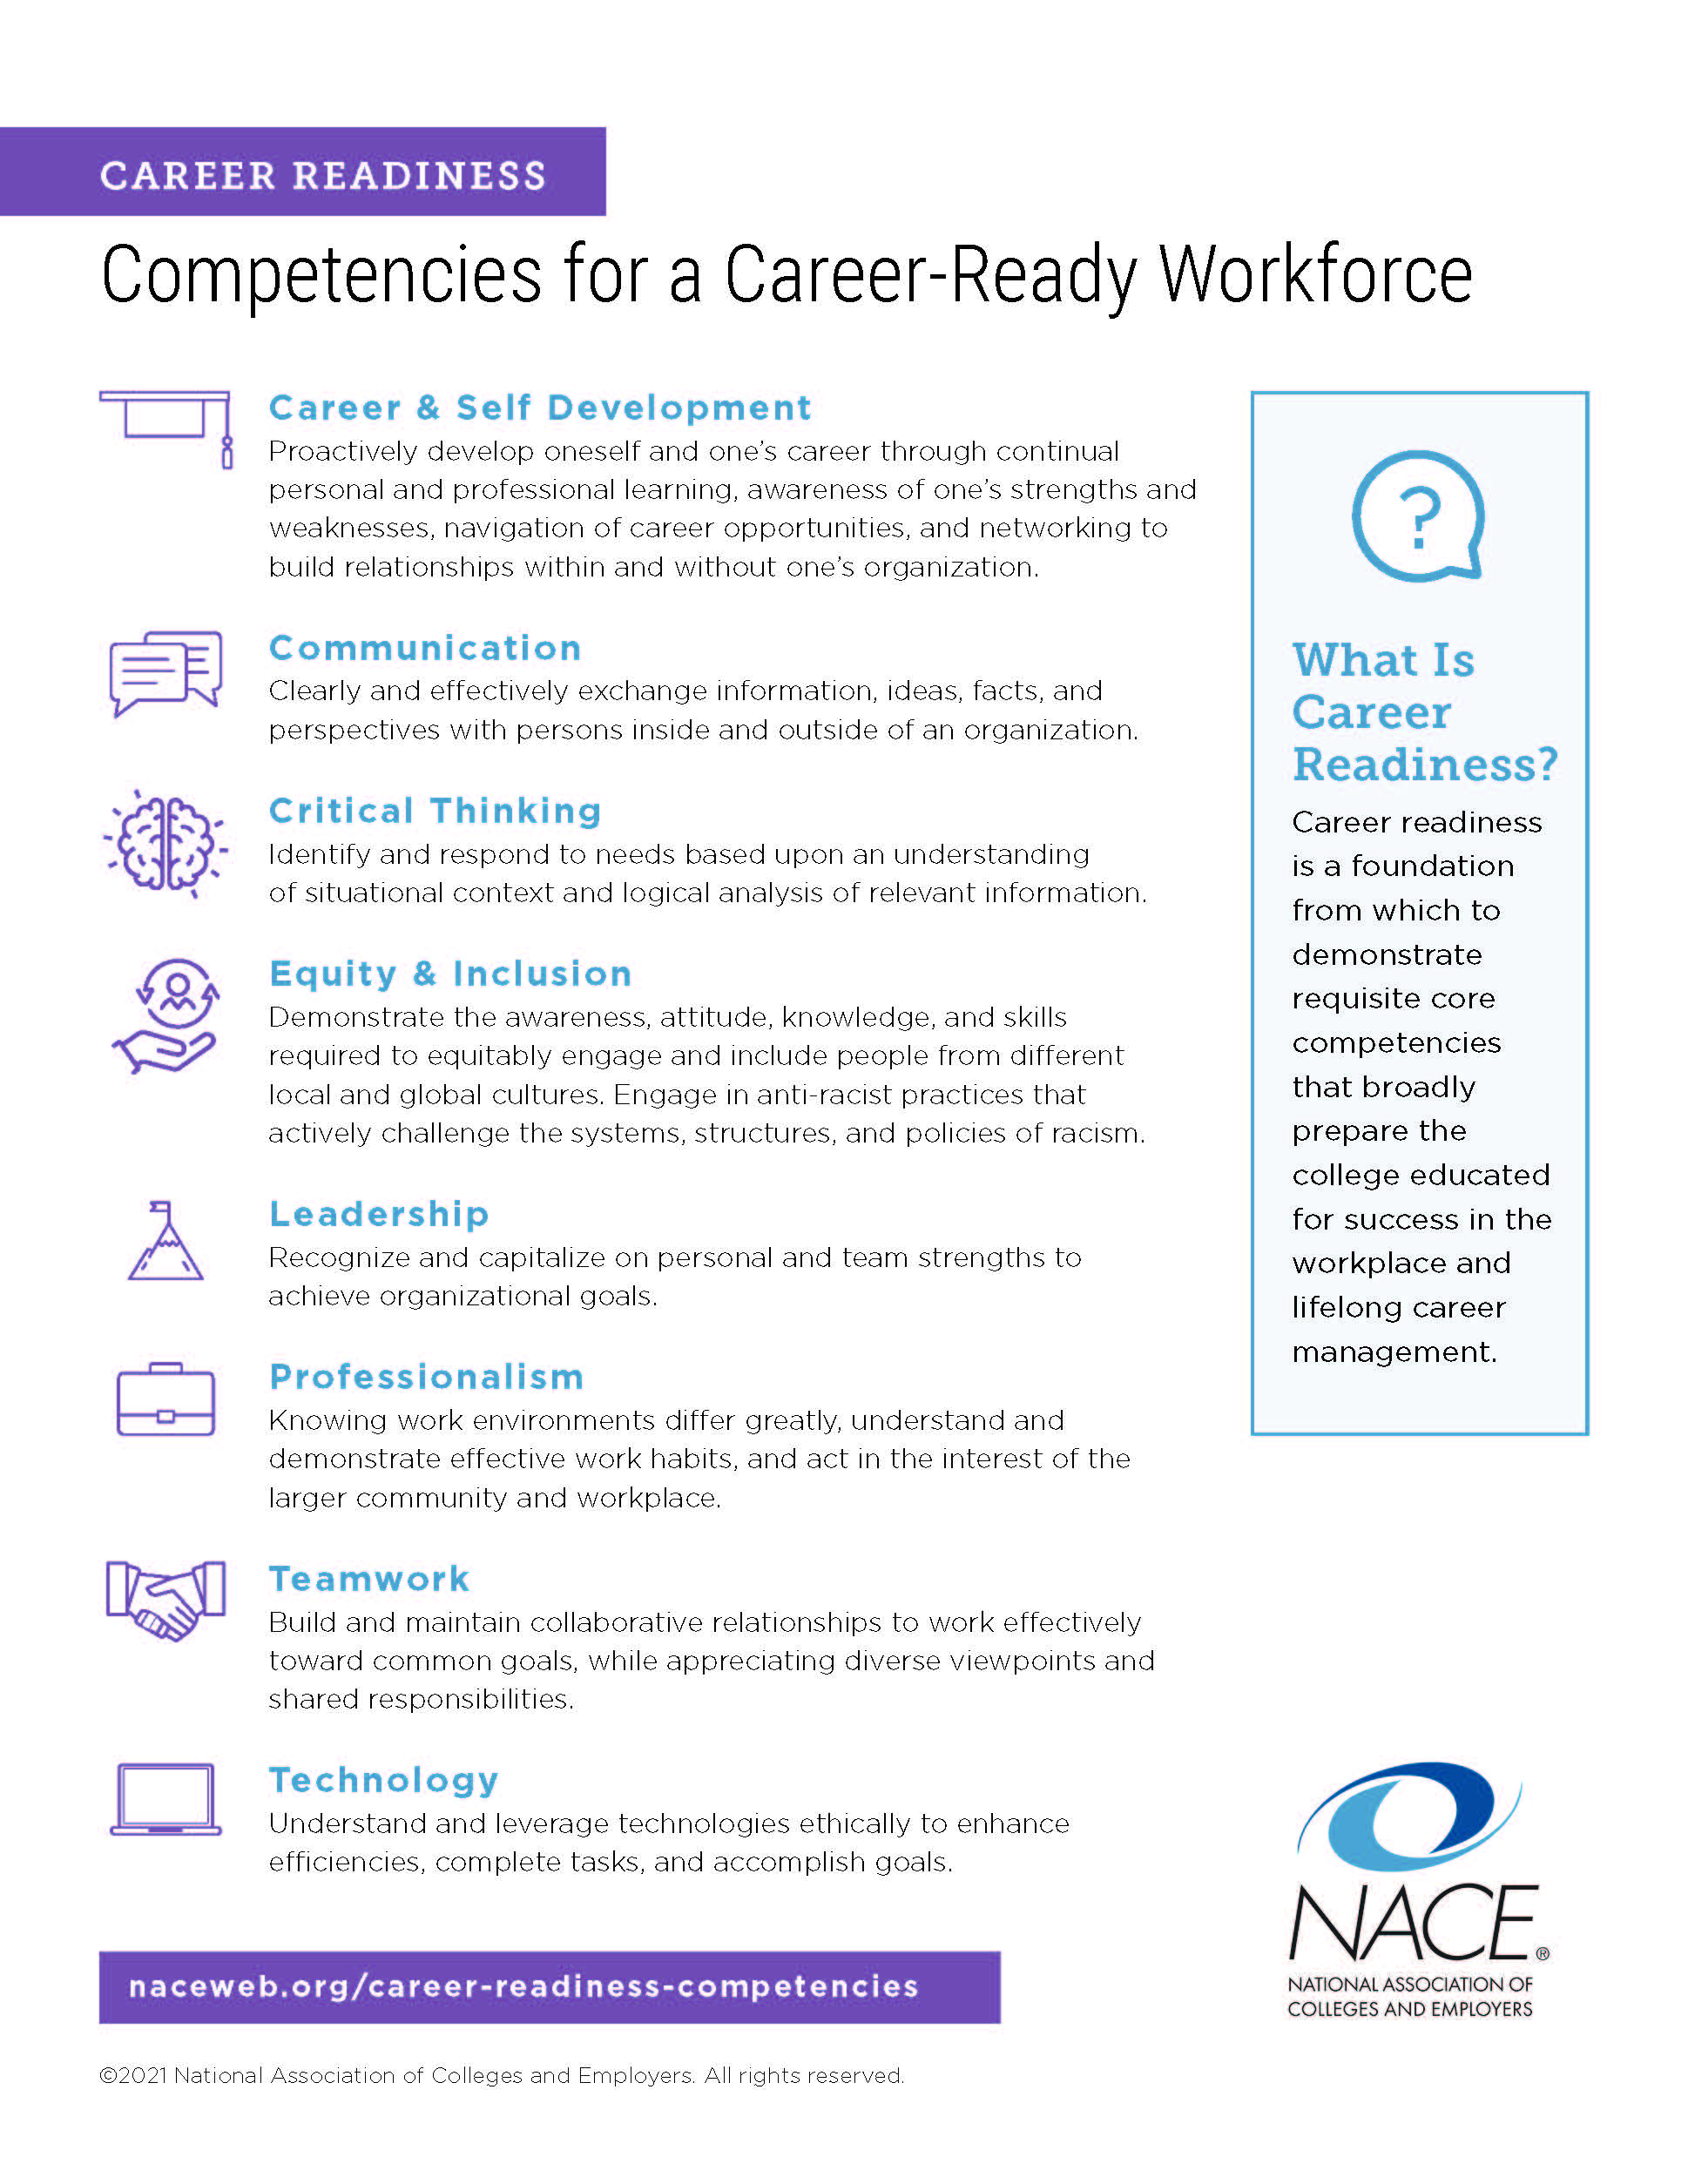 Nace-career-readiness-competencies-apr-2021-poster.jpg